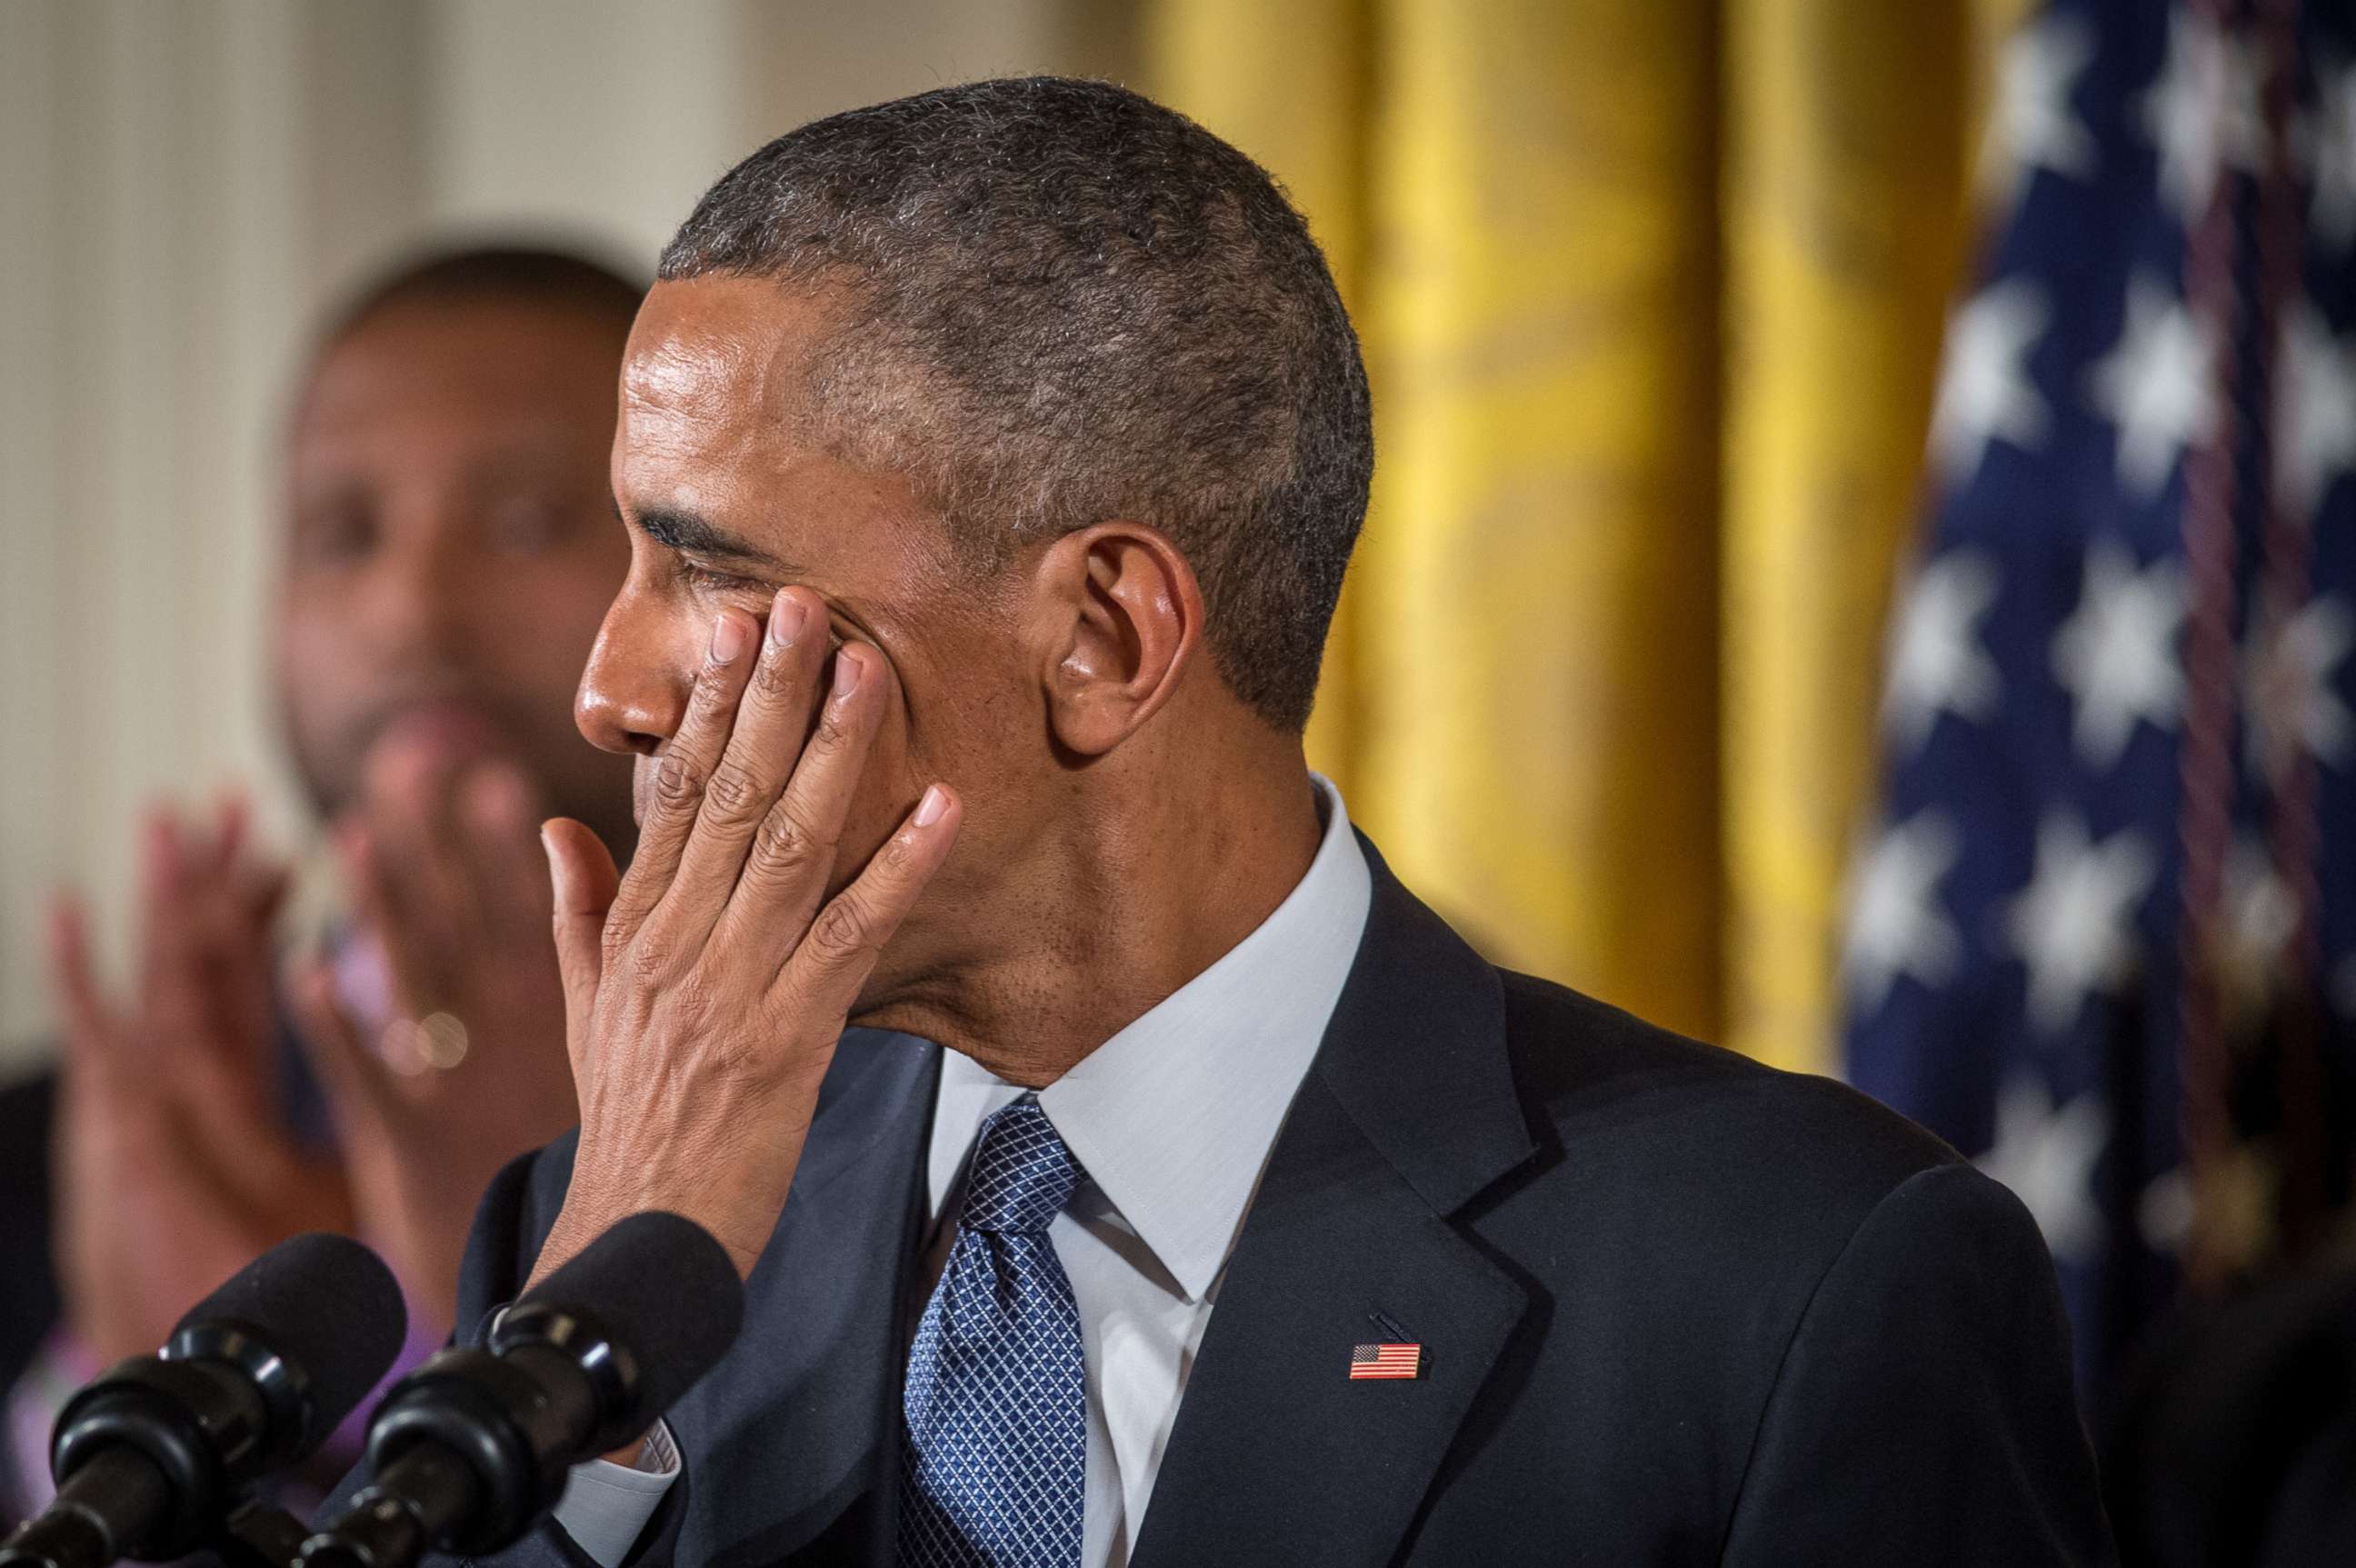 PHOTO: President Barack Obama wipes away tears as he talks about needless shootings at Sandy Hook Elementary school during a press briefing at the White House, Jan. 5, 2015, in Washington D.C.